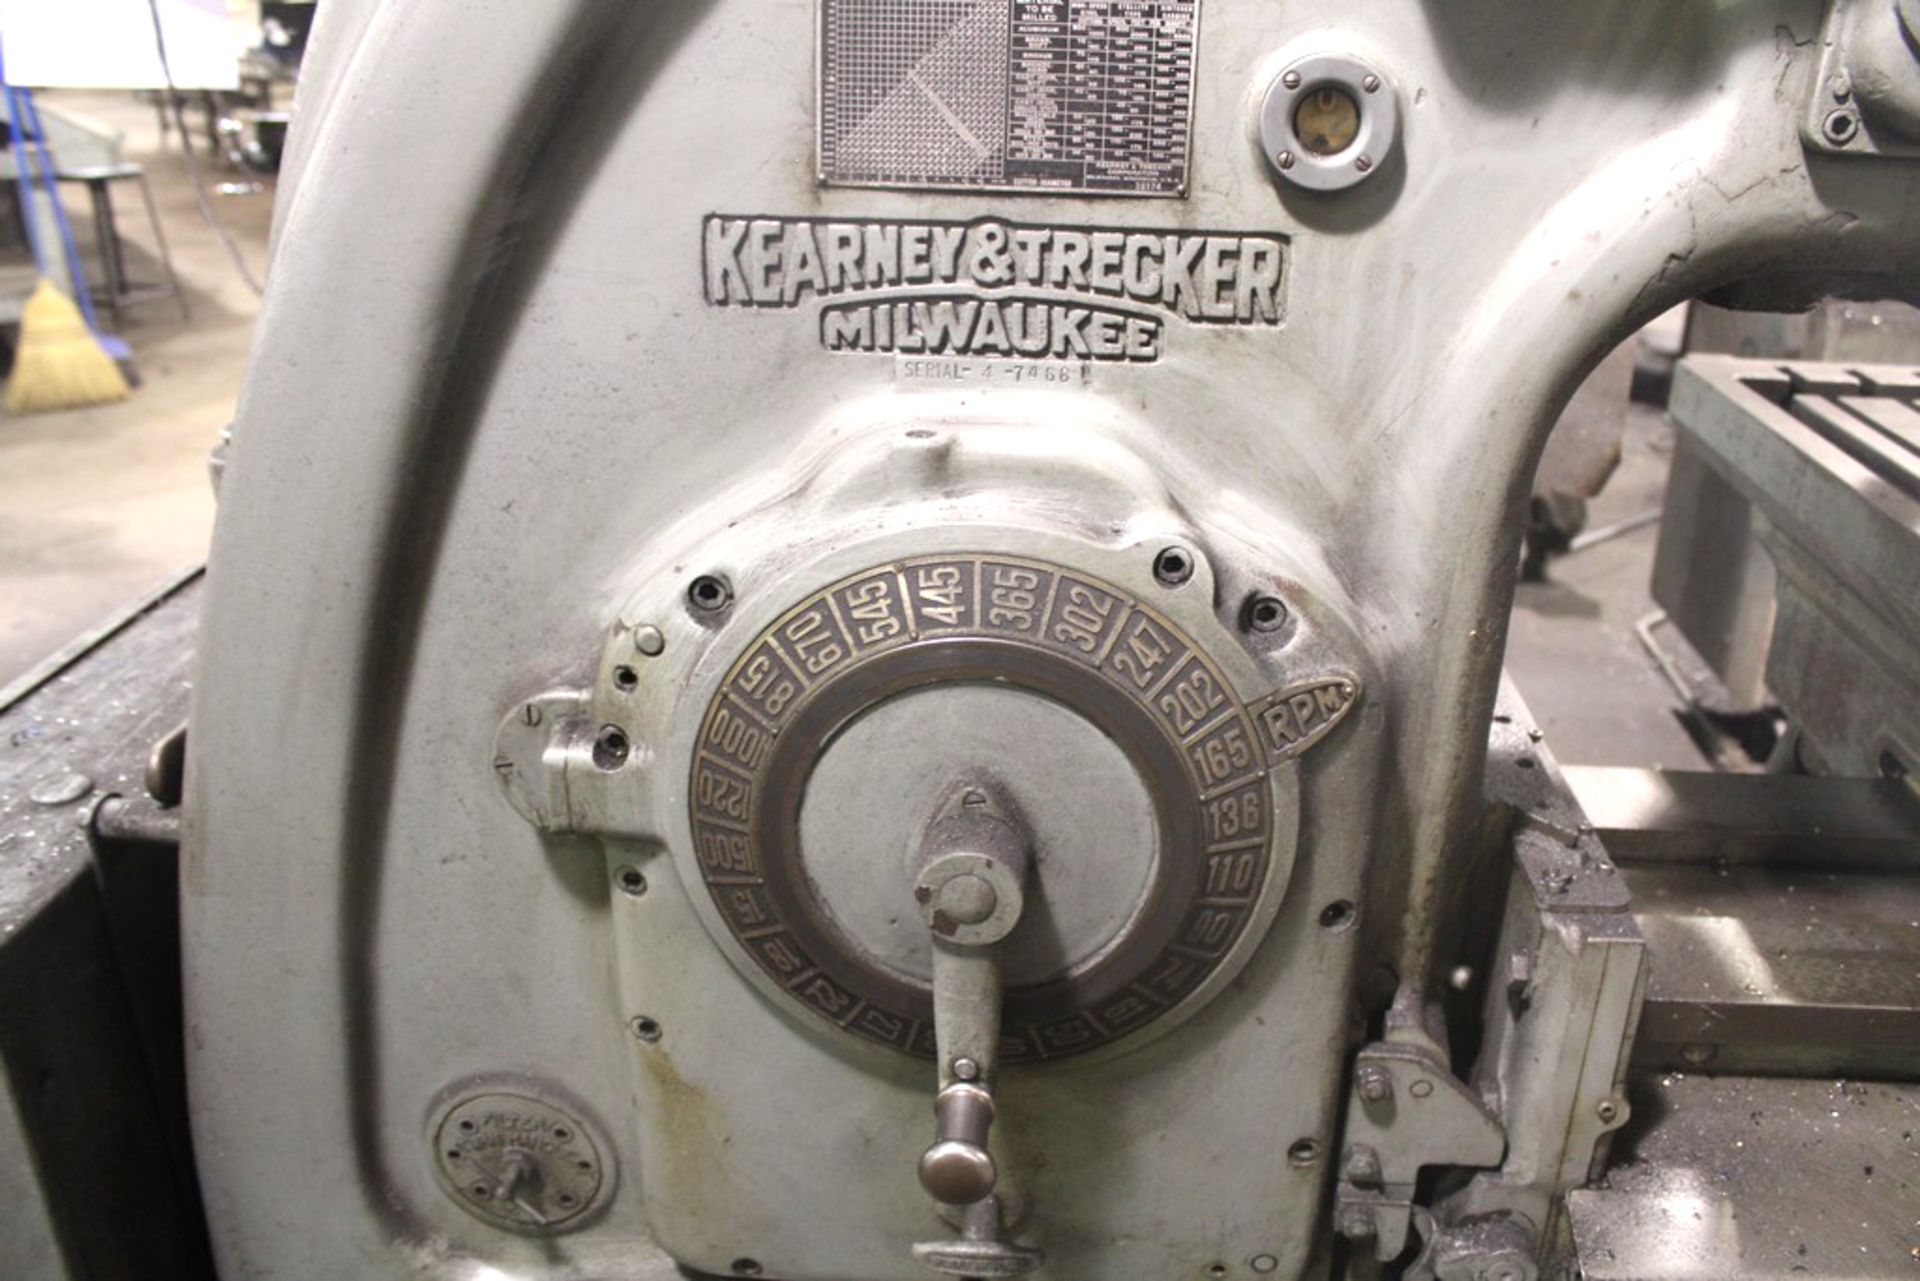 KEARNEY & TRECKER MODEL 10HP-2CK VERTICAL MILL, S/N 4-7466, 13”X58” TABLE, 1500 RPM SPINDLE - Image 3 of 6